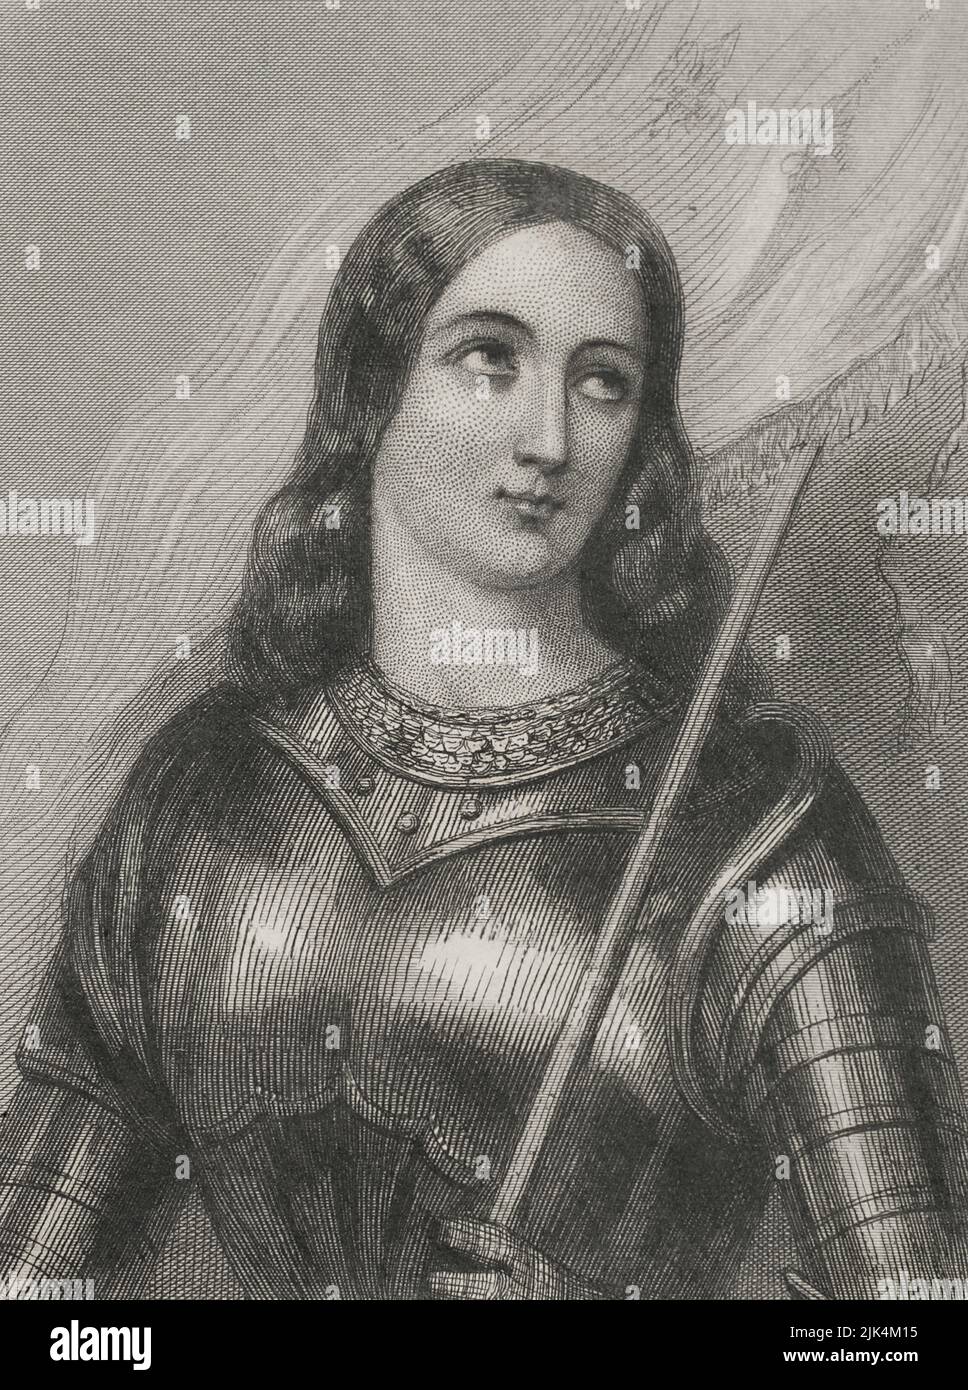 Saint Joan of Arc (1412-1431), so-called the Maid of Orleans. French heroine. Beatified in 1909 and canonized in 1920. Portrait. Engraving by Geoffroy. "Historia Universal", by César Cantú. Volume IV, 1856. Stock Photo